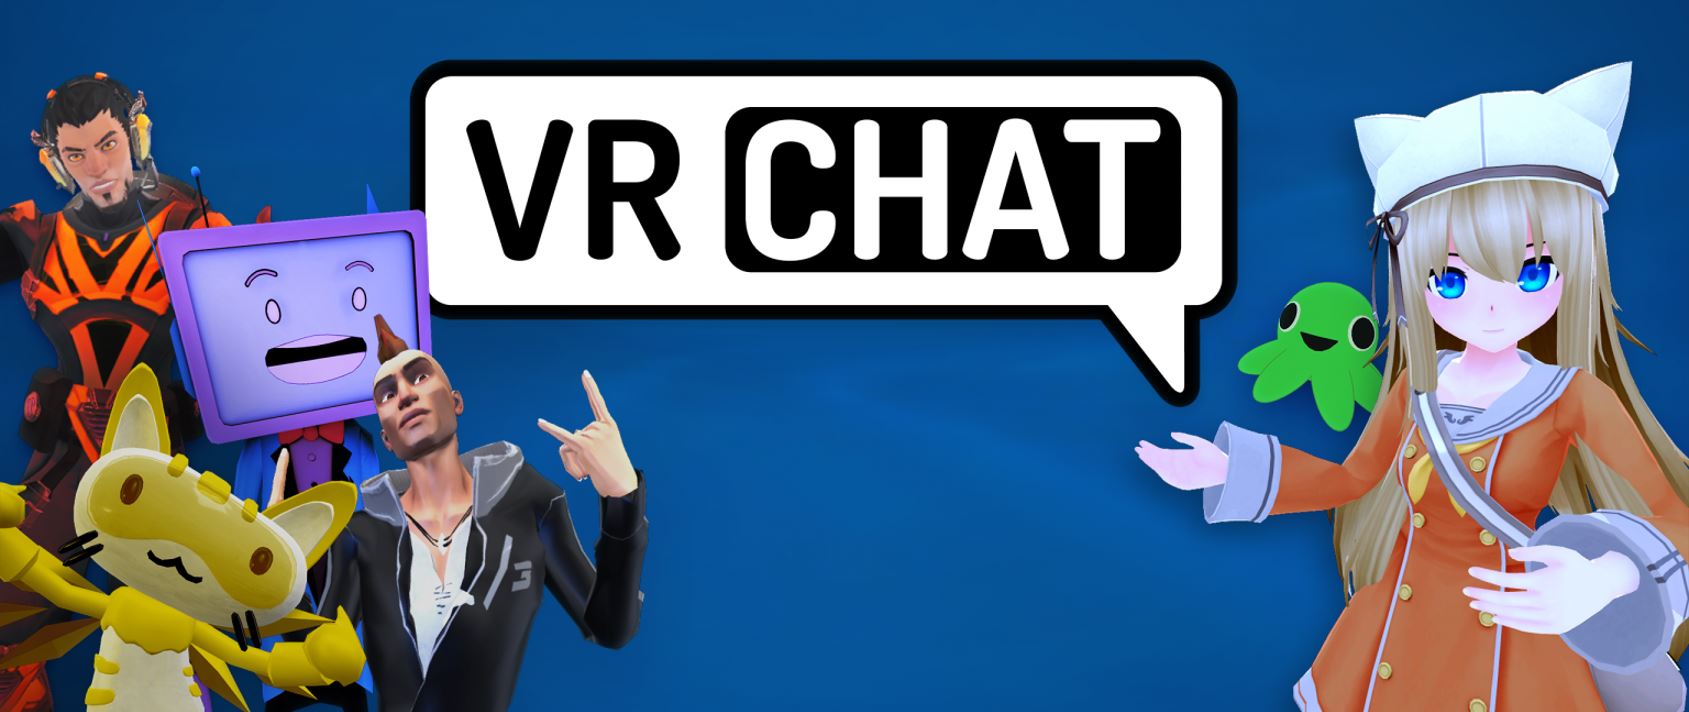 VRChat, Decentraland, The Sandbox, Somnium Space and Roblox. Are you familiar with any of them?